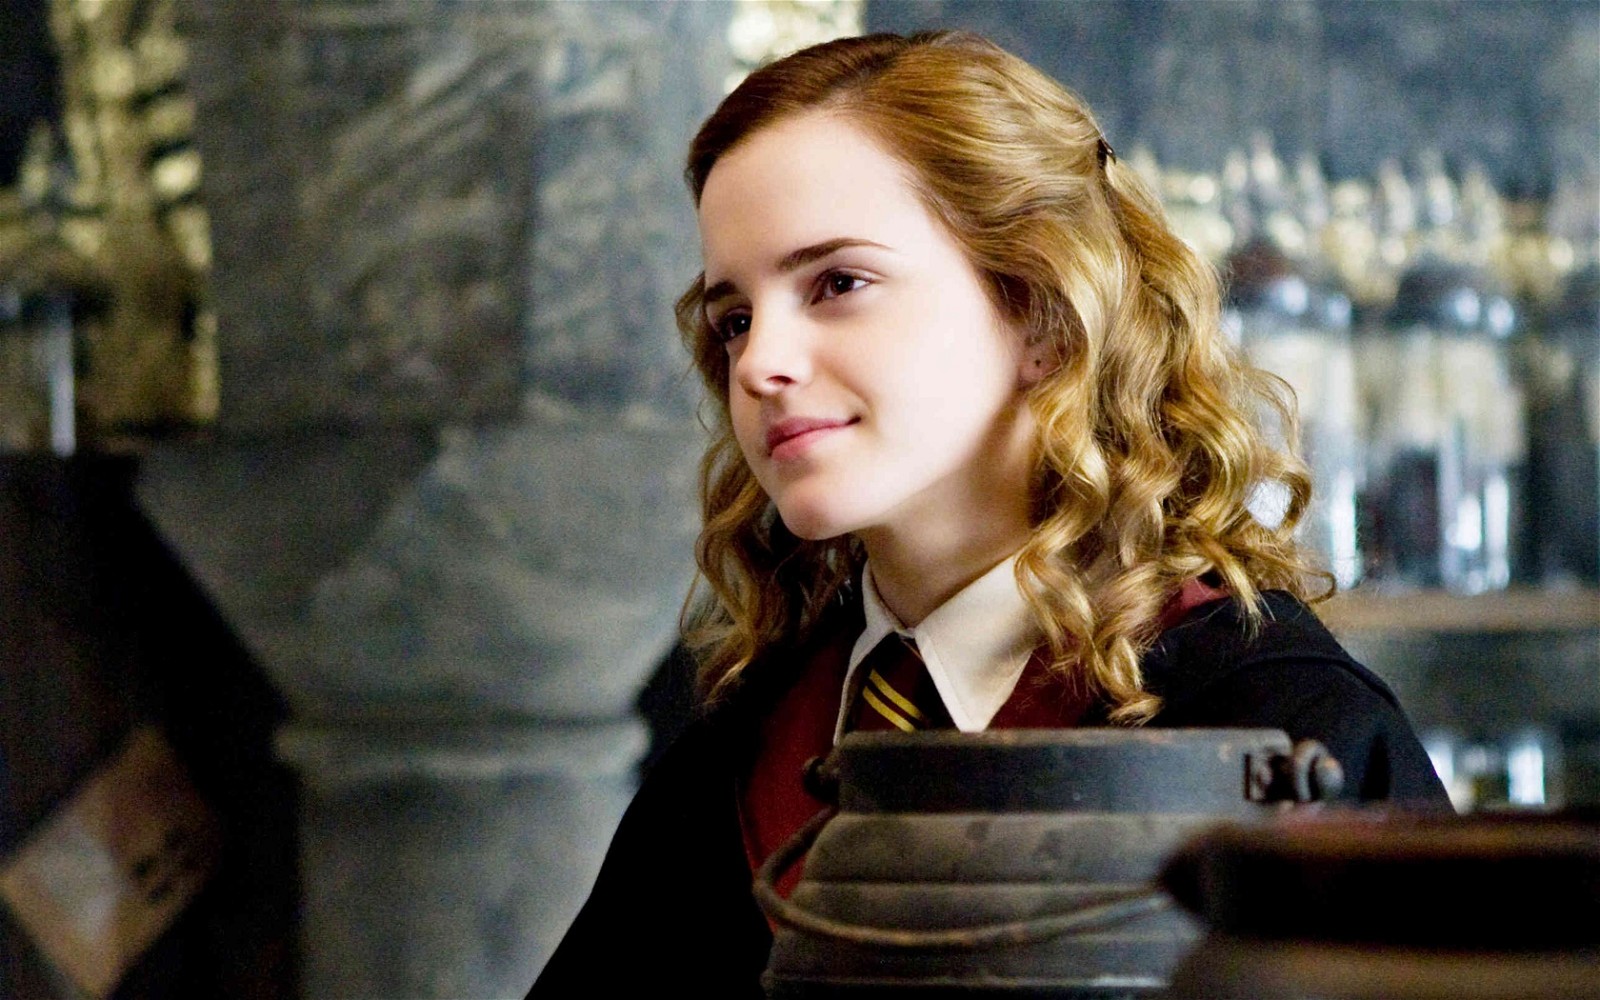 I probably would have been public enemy No. 1: Emma Watson Revealed Why  She Returned as Hermione Granger Despite Her Hesitation to Join $7.7B Harry  Potter Franchise